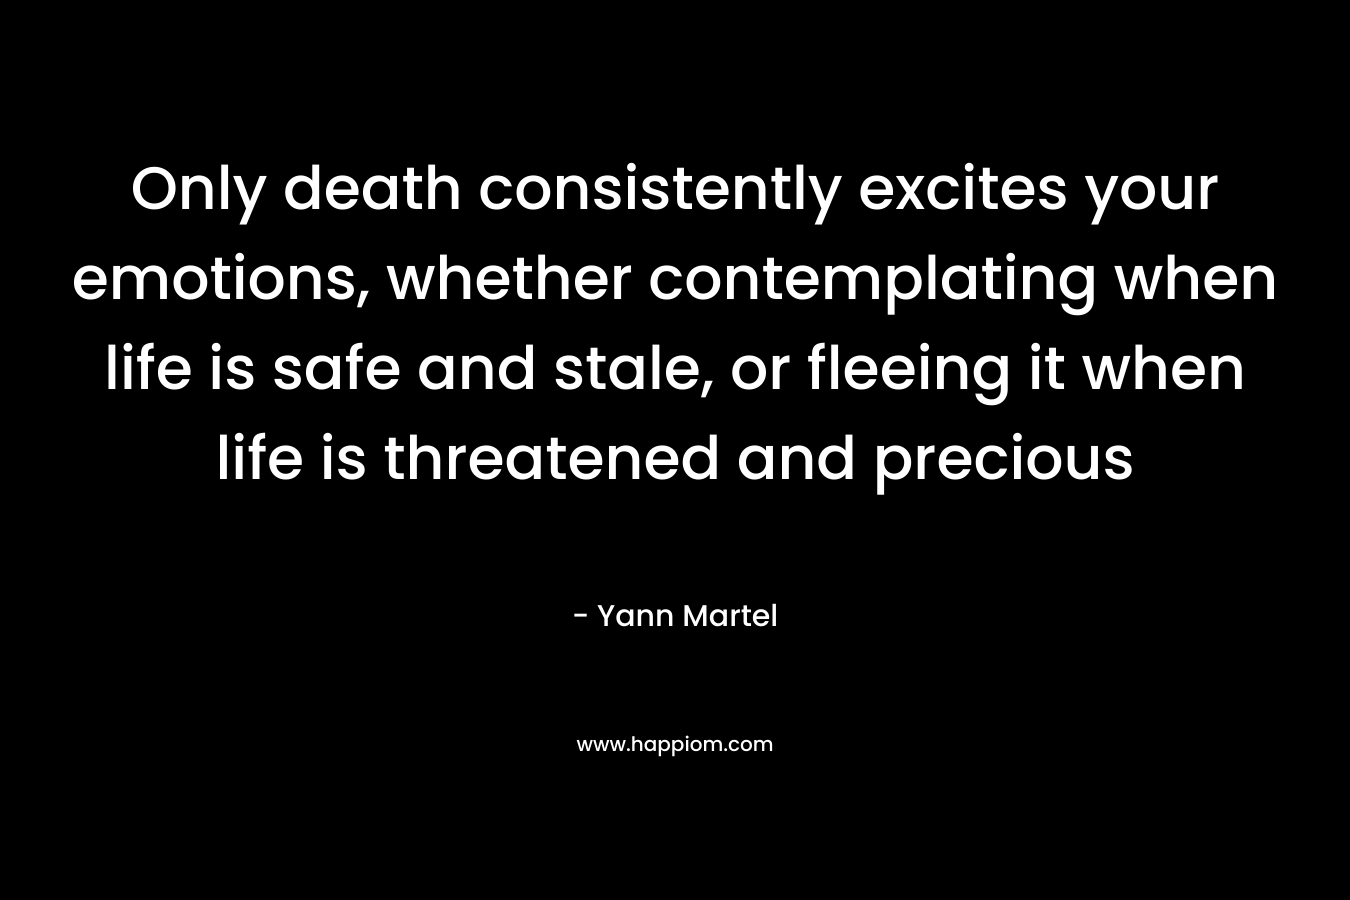 Only death consistently excites your emotions, whether contemplating when life is safe and stale, or fleeing it when life is threatened and precious